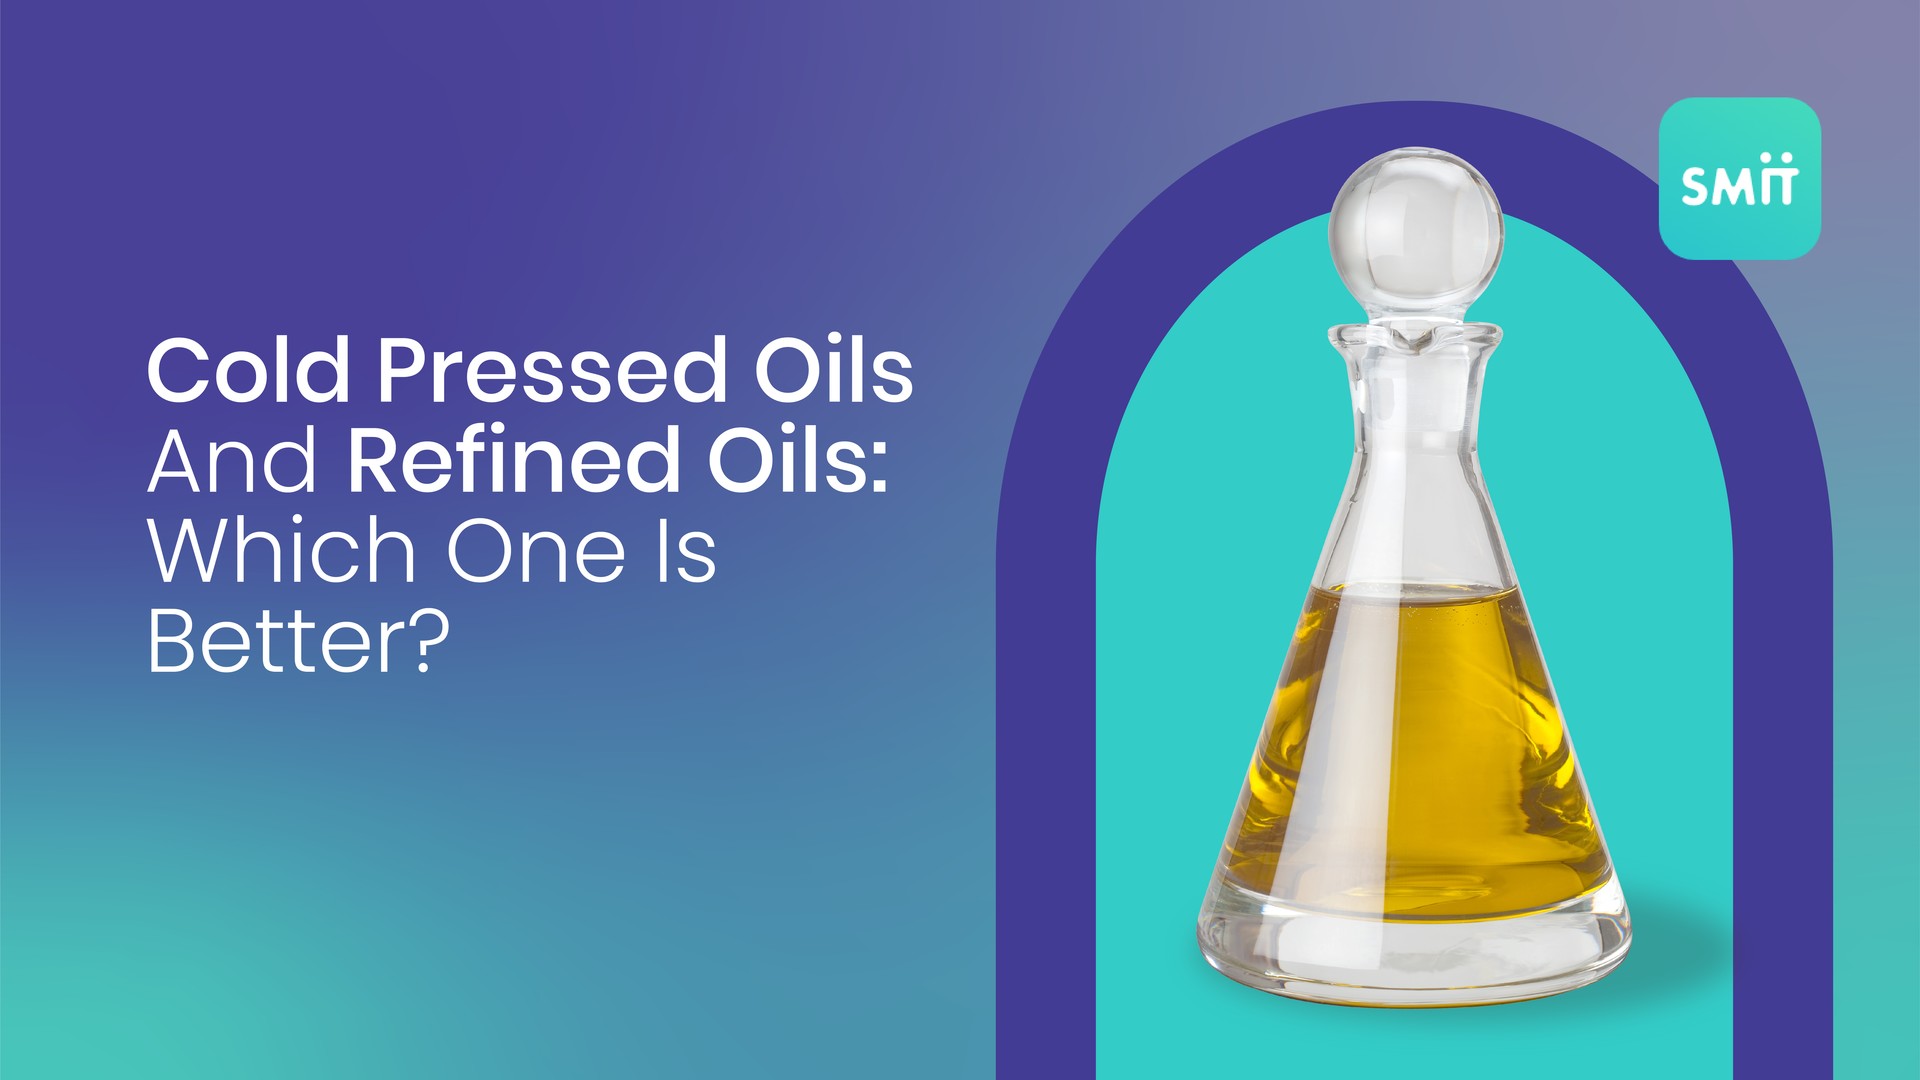 Cold Pressed Oils And Refined Oils: Which One Is Better?